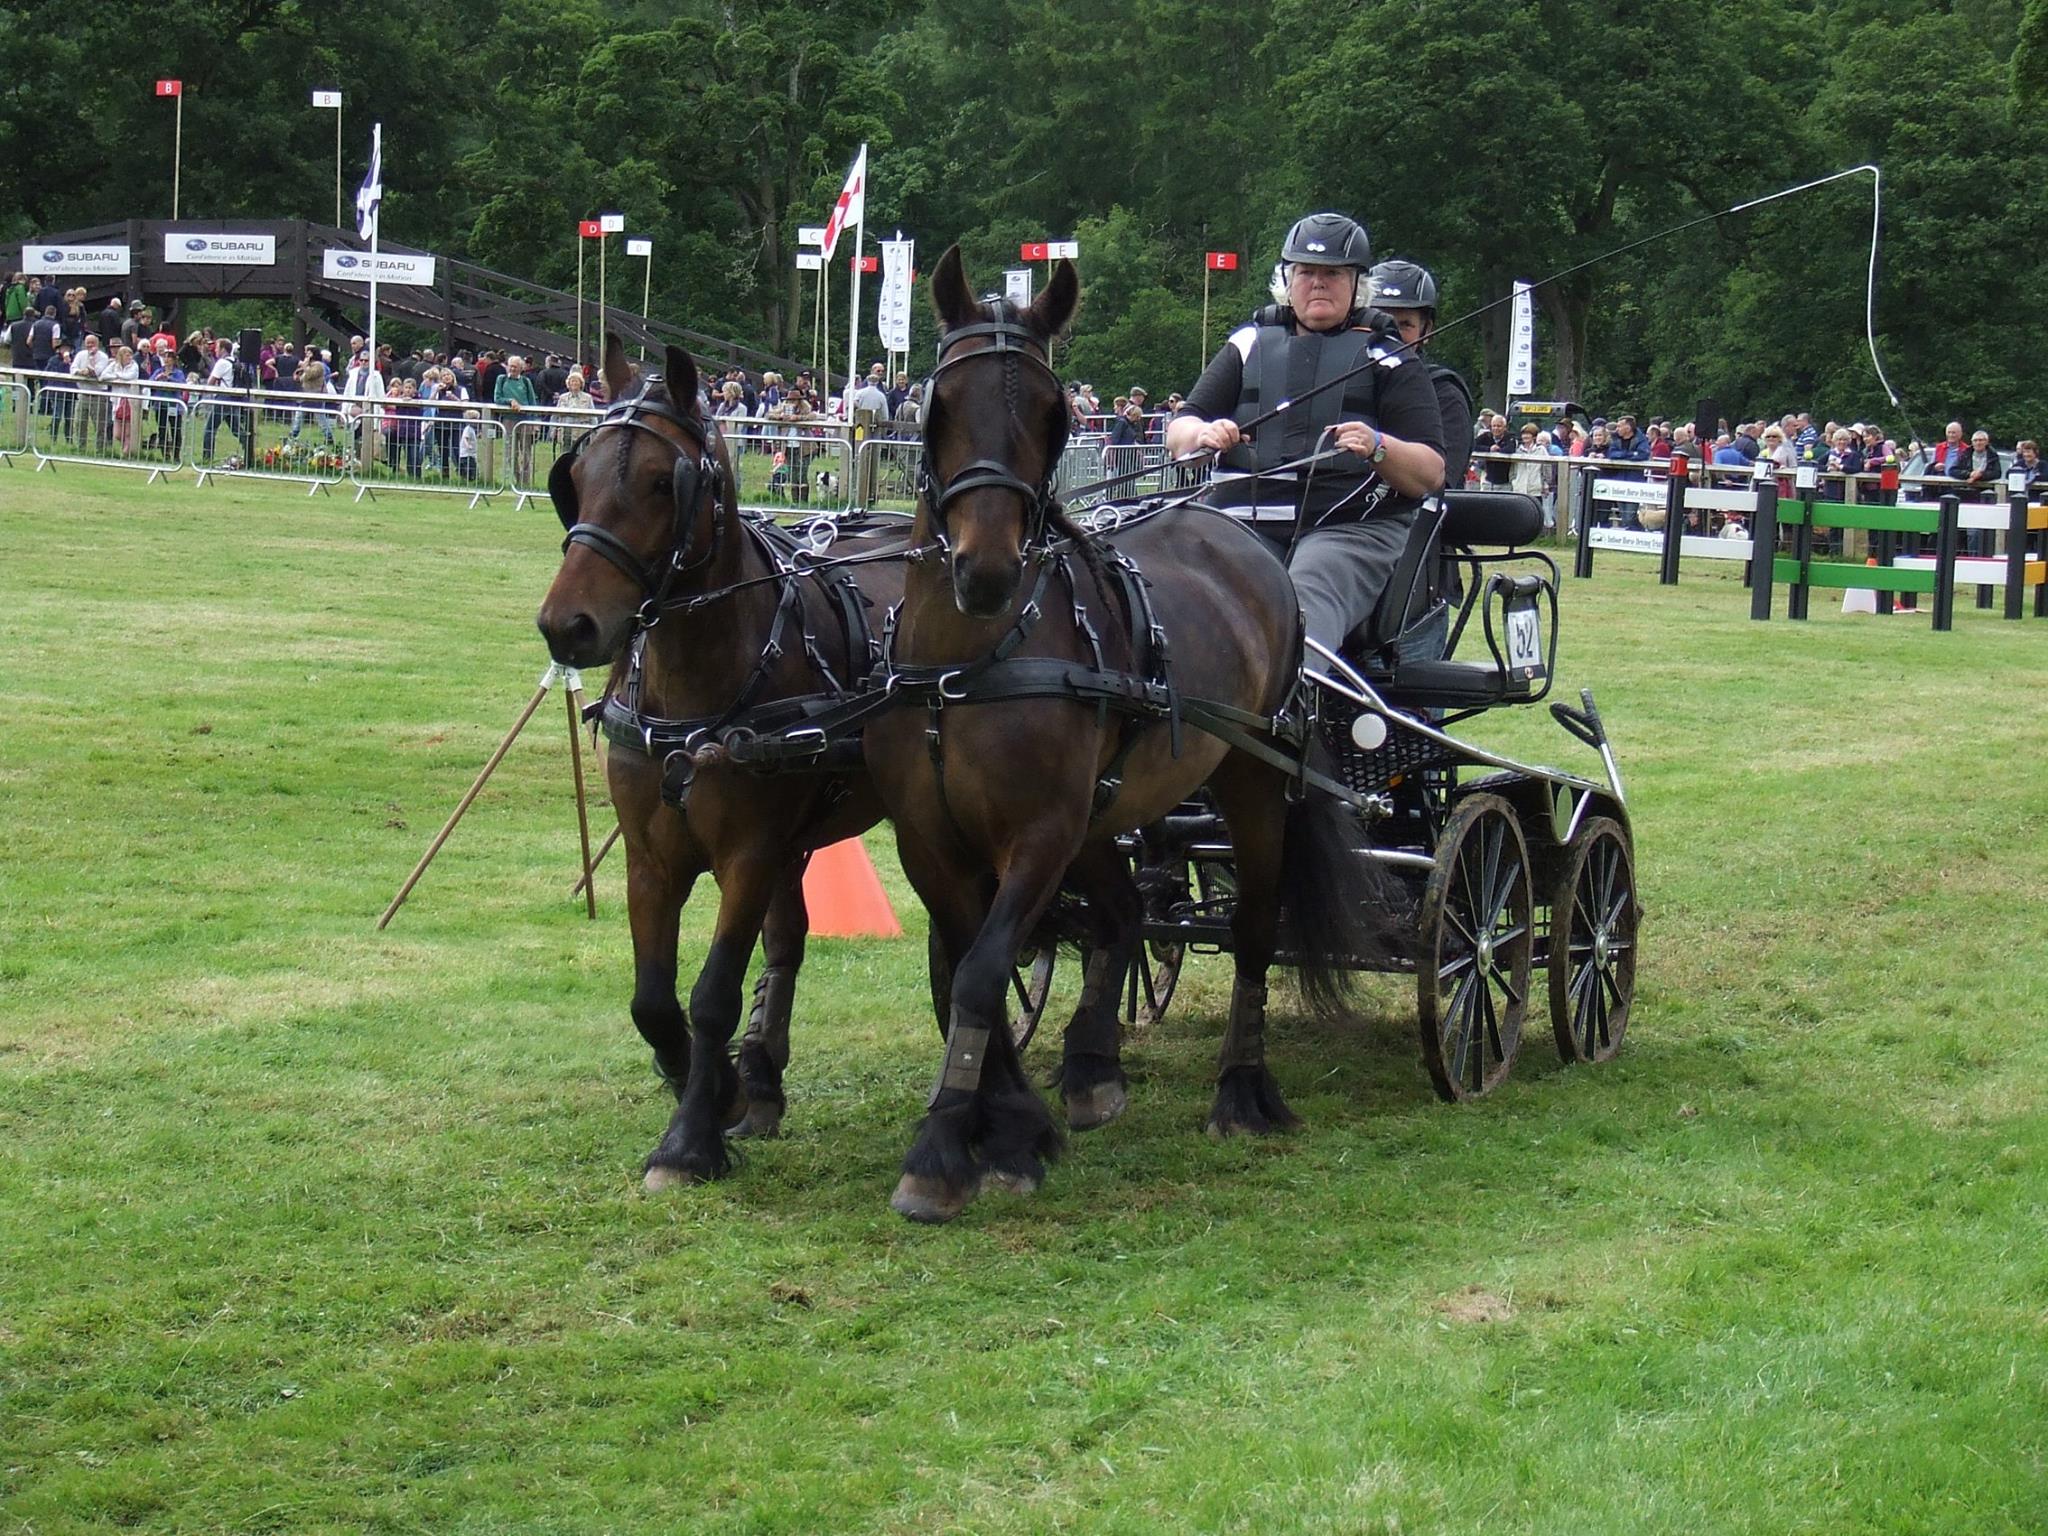 pair of brown fell ponies pulling a competition carriage